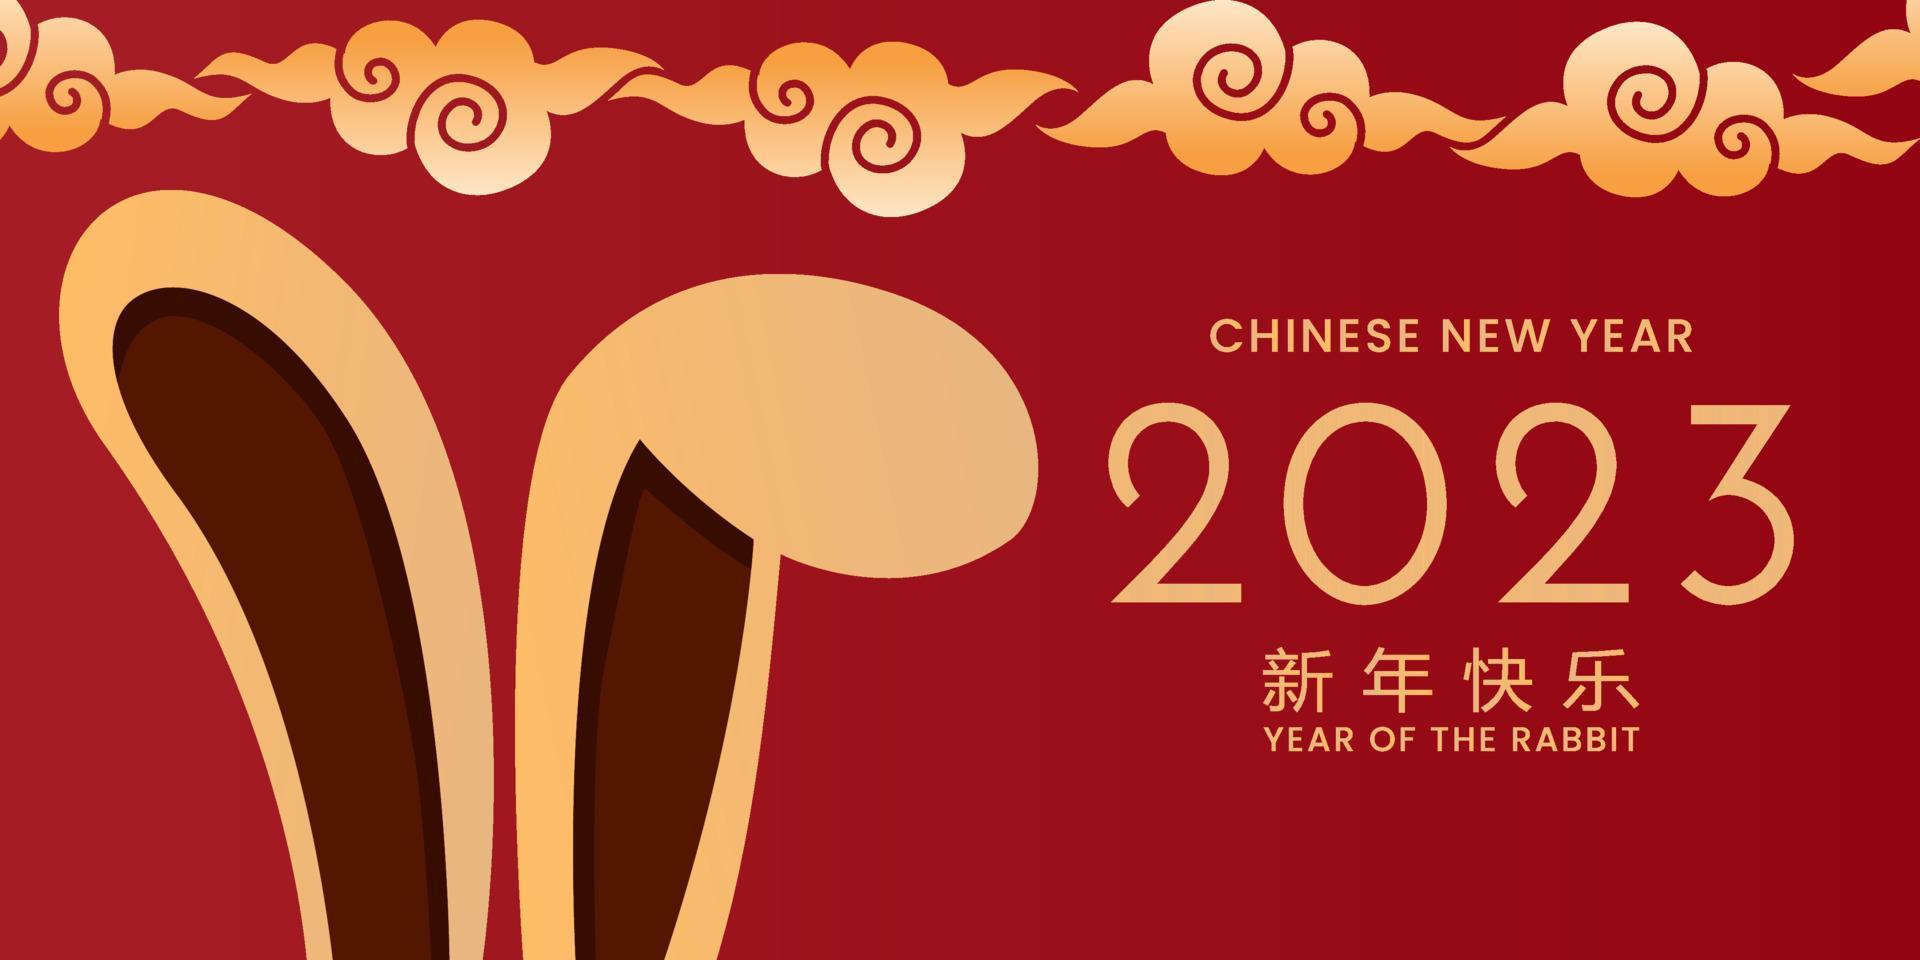 The Chinese new year 2023 - the year of the rabbit. Happy Chinese New Year 2023. Lunar new year. vector